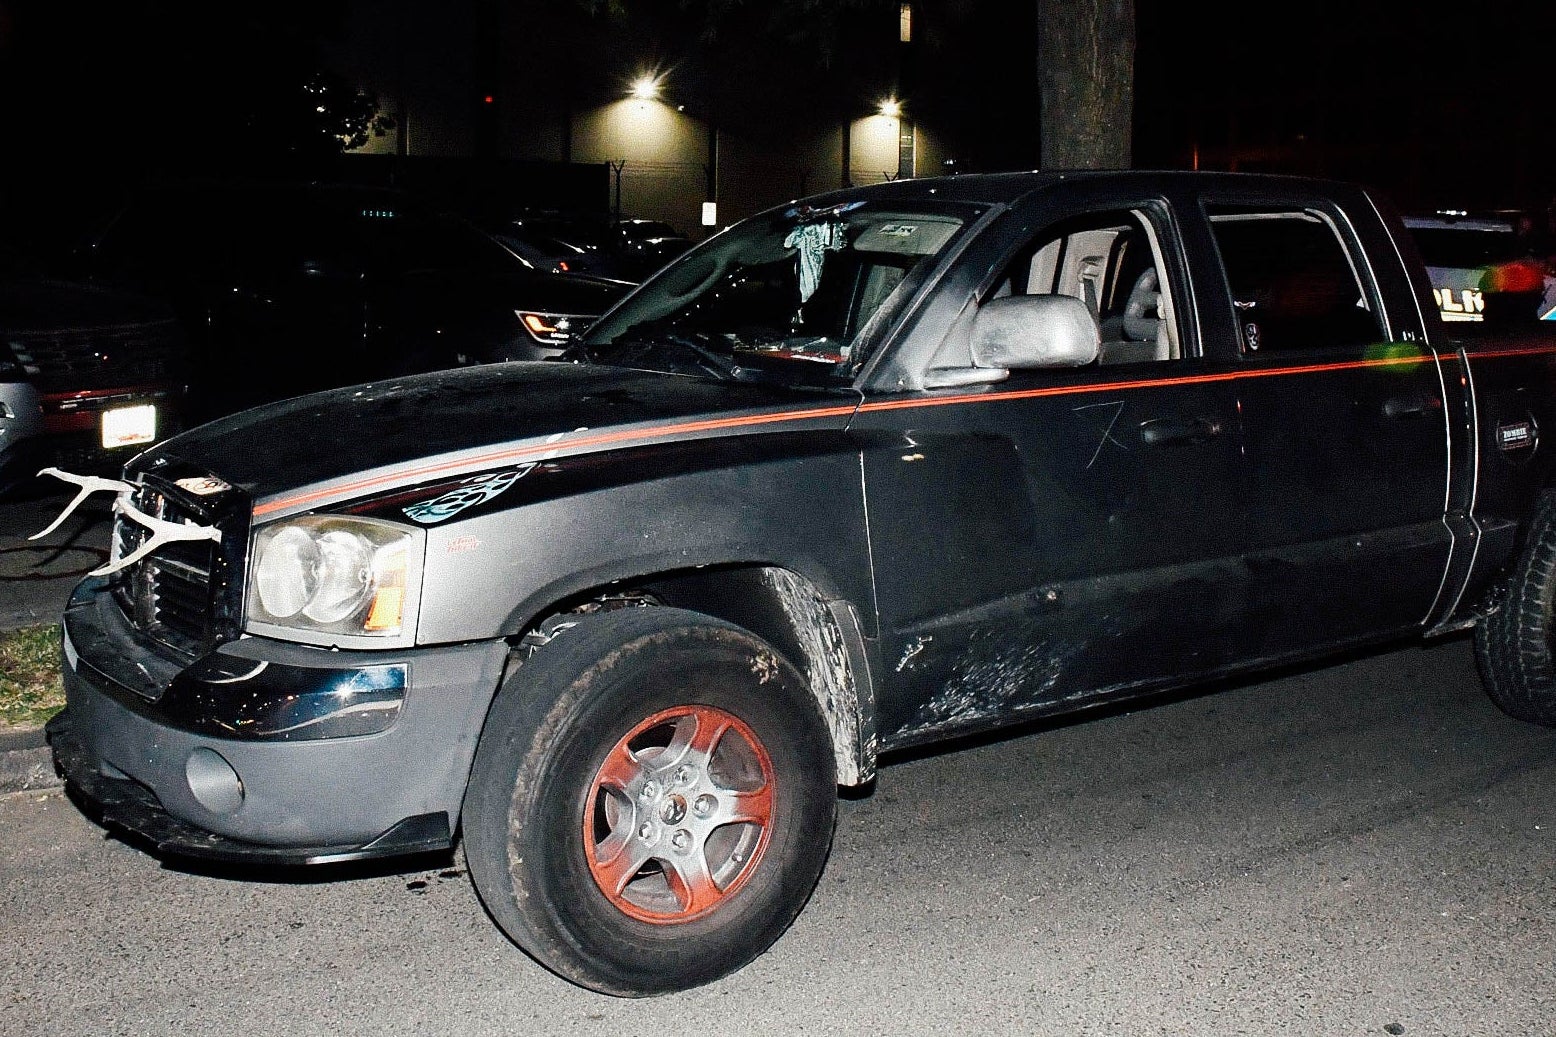 A dilapidated black truck with red piping and what appear to be antlers on its front grille is seen in the glare of a camera flash or spotlight.